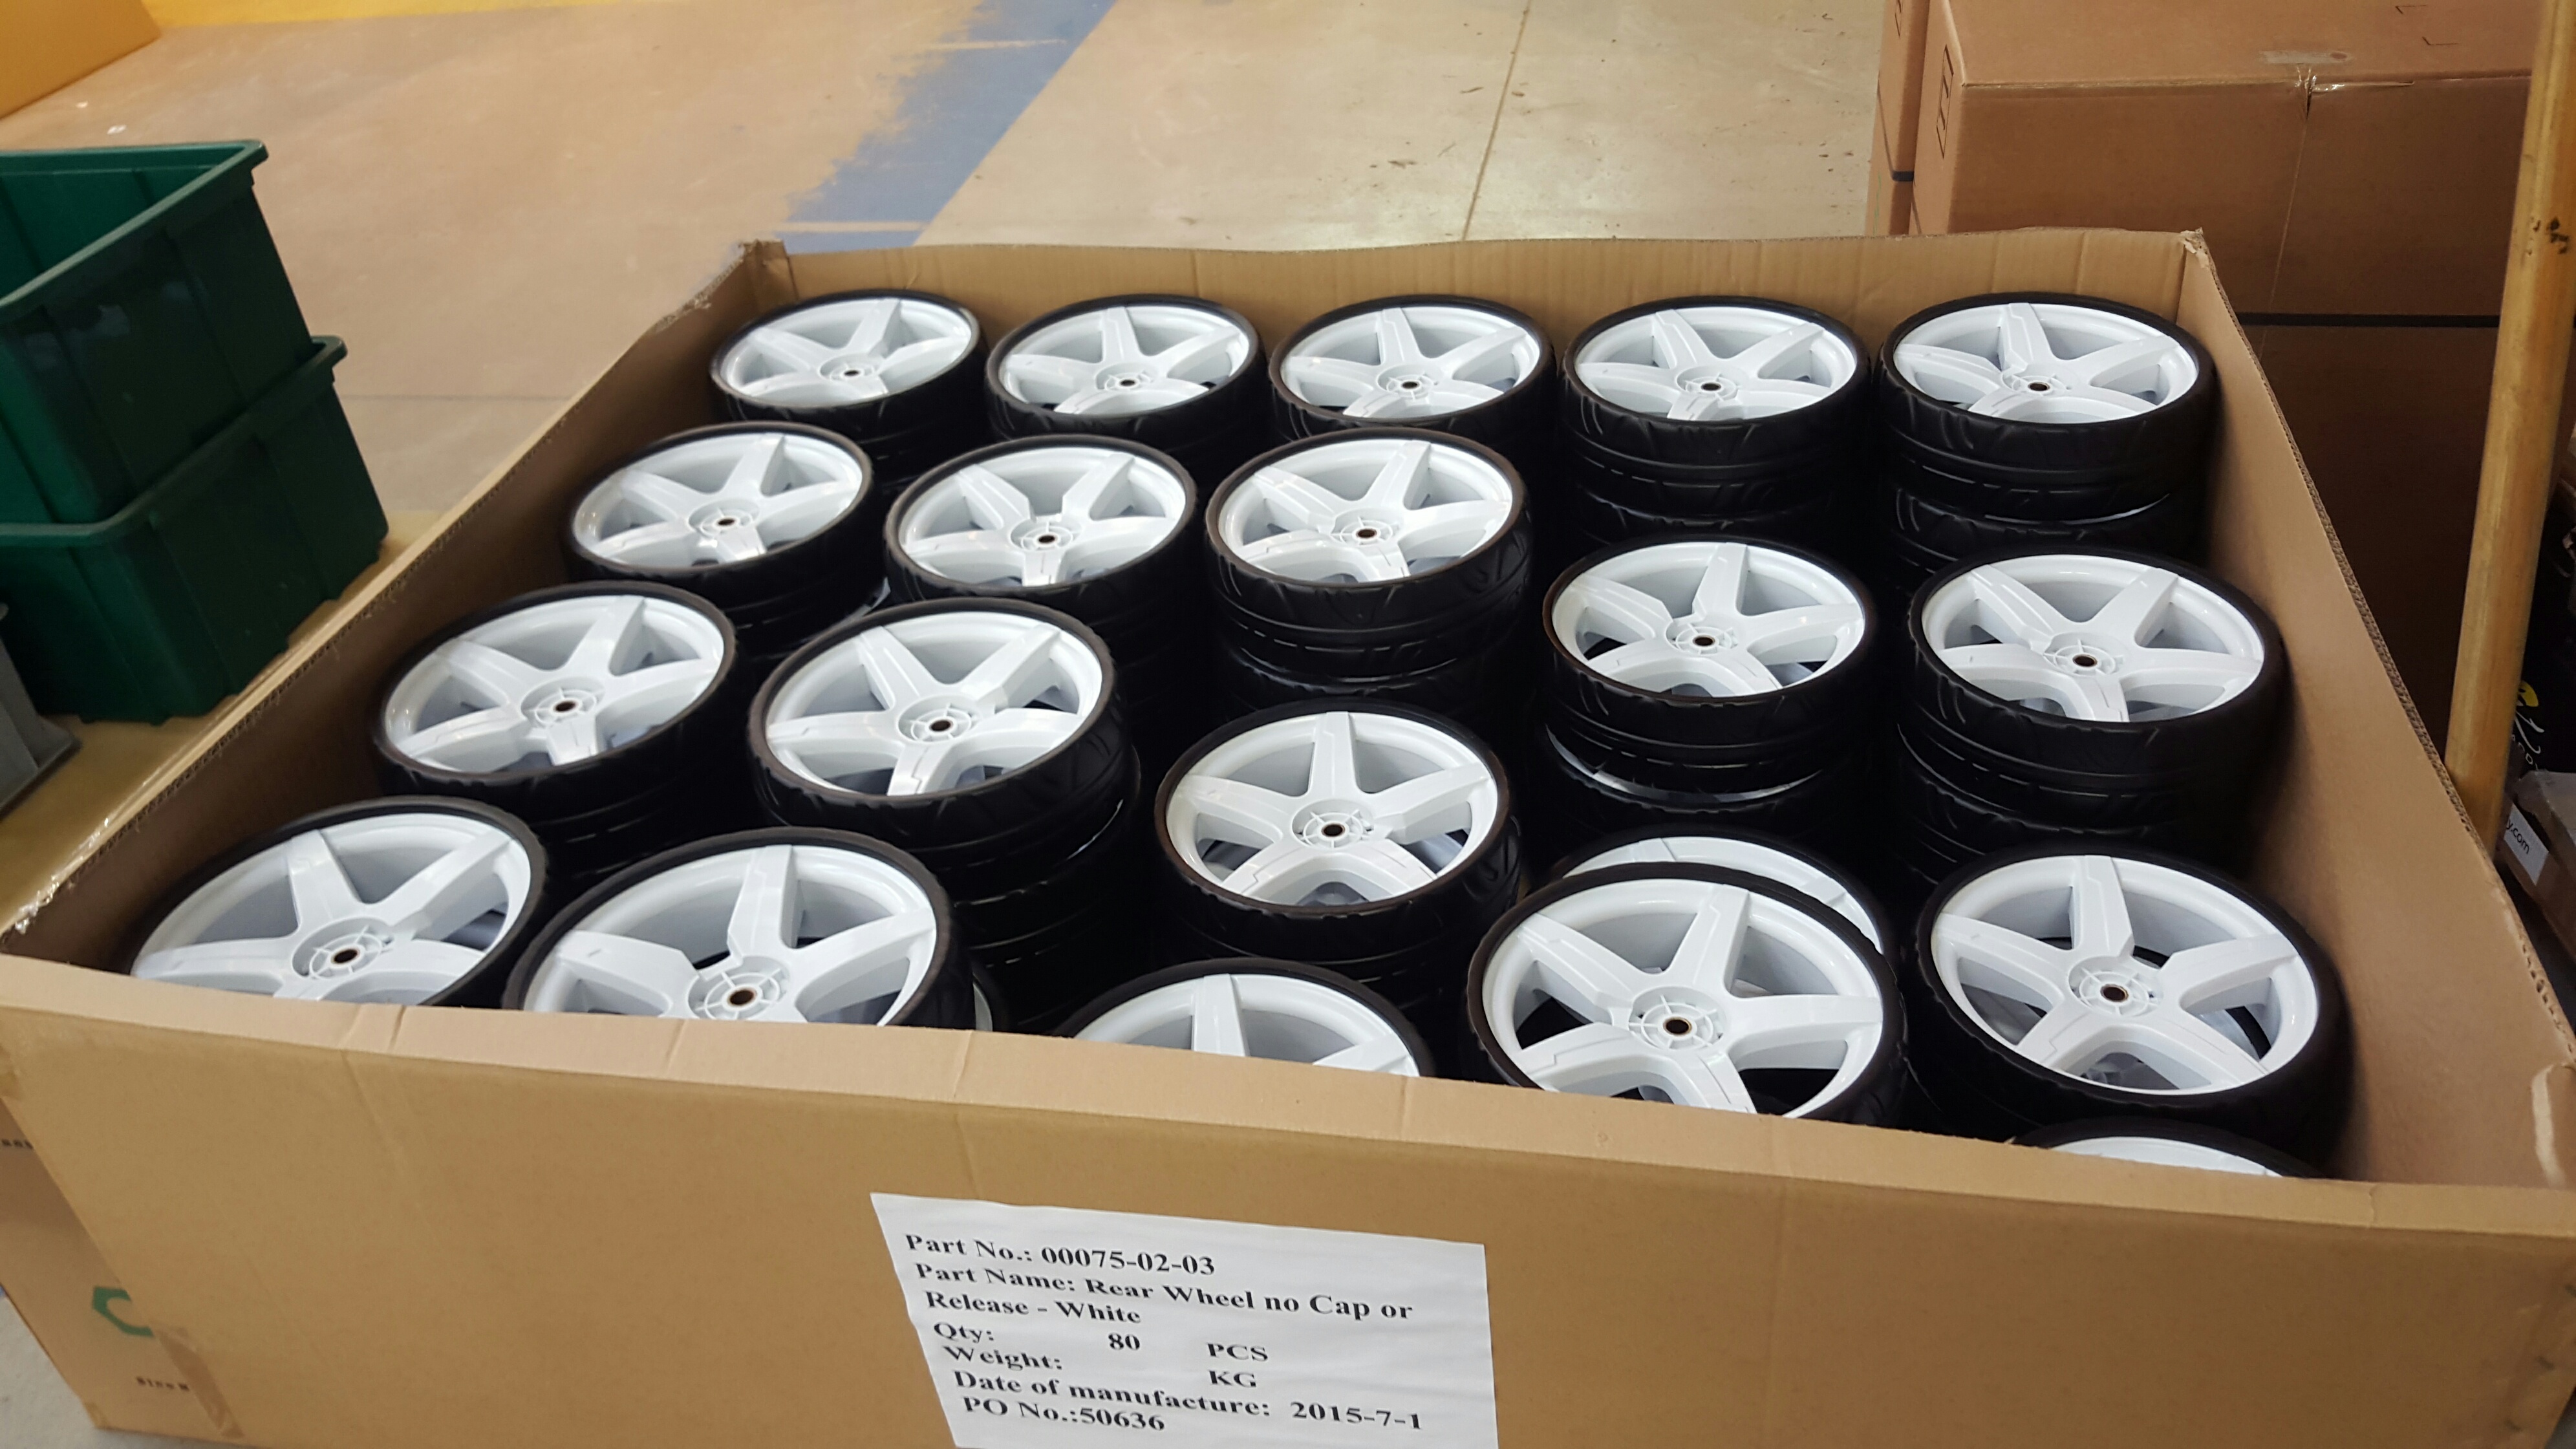 Wheels are removable, and Winter Wheels are available 